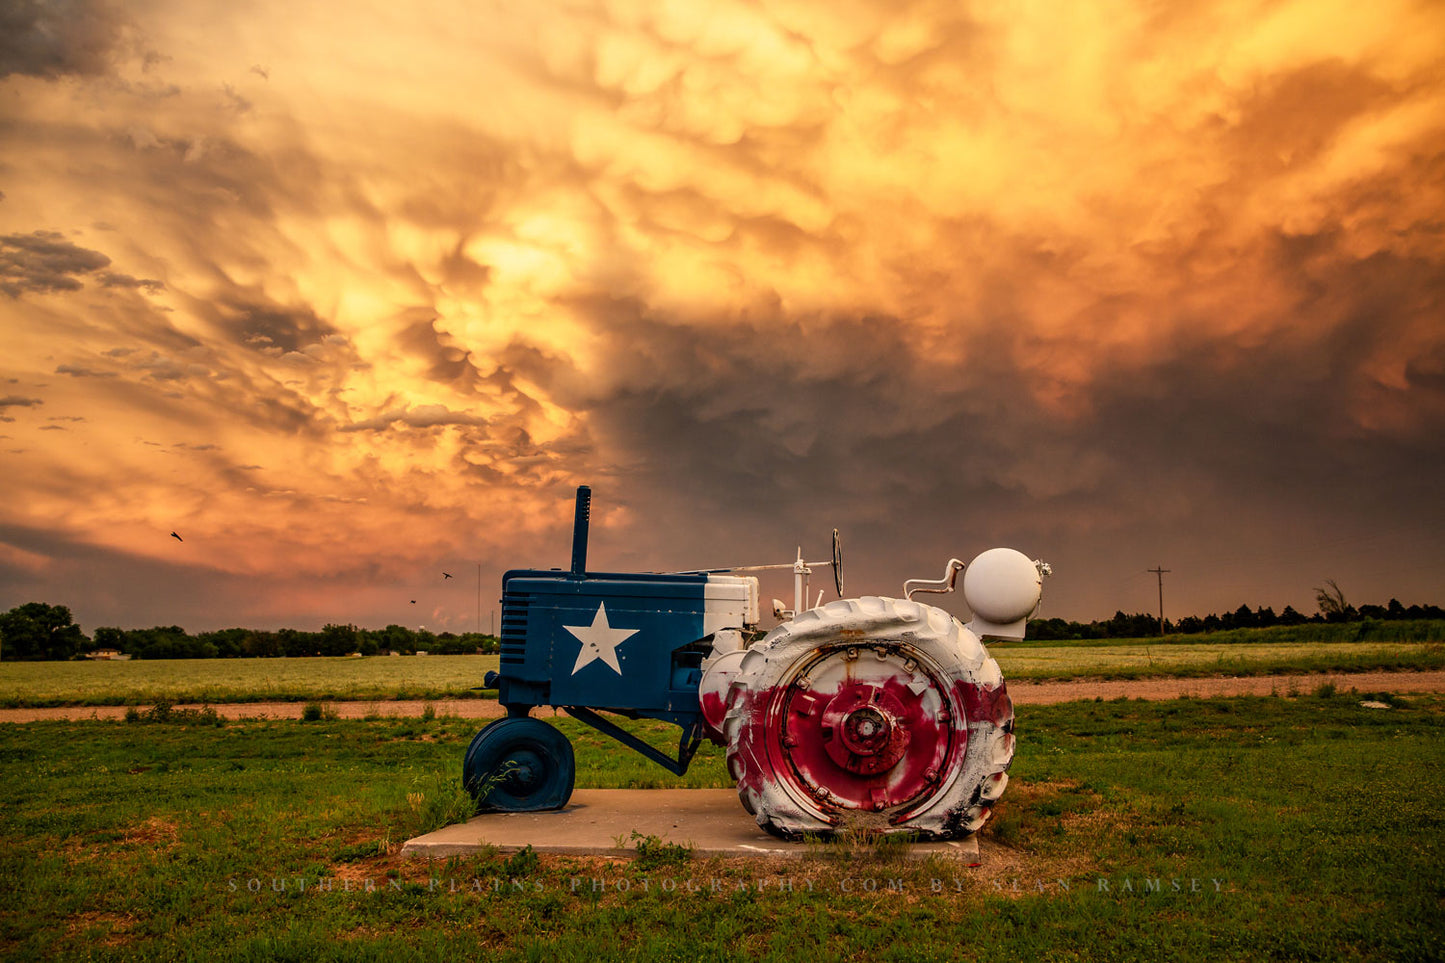 Country photography print of a tractor painted as the Lone Star flag on a stormy evening in Texas by Sean Ramsey of Southern Plains Photography.